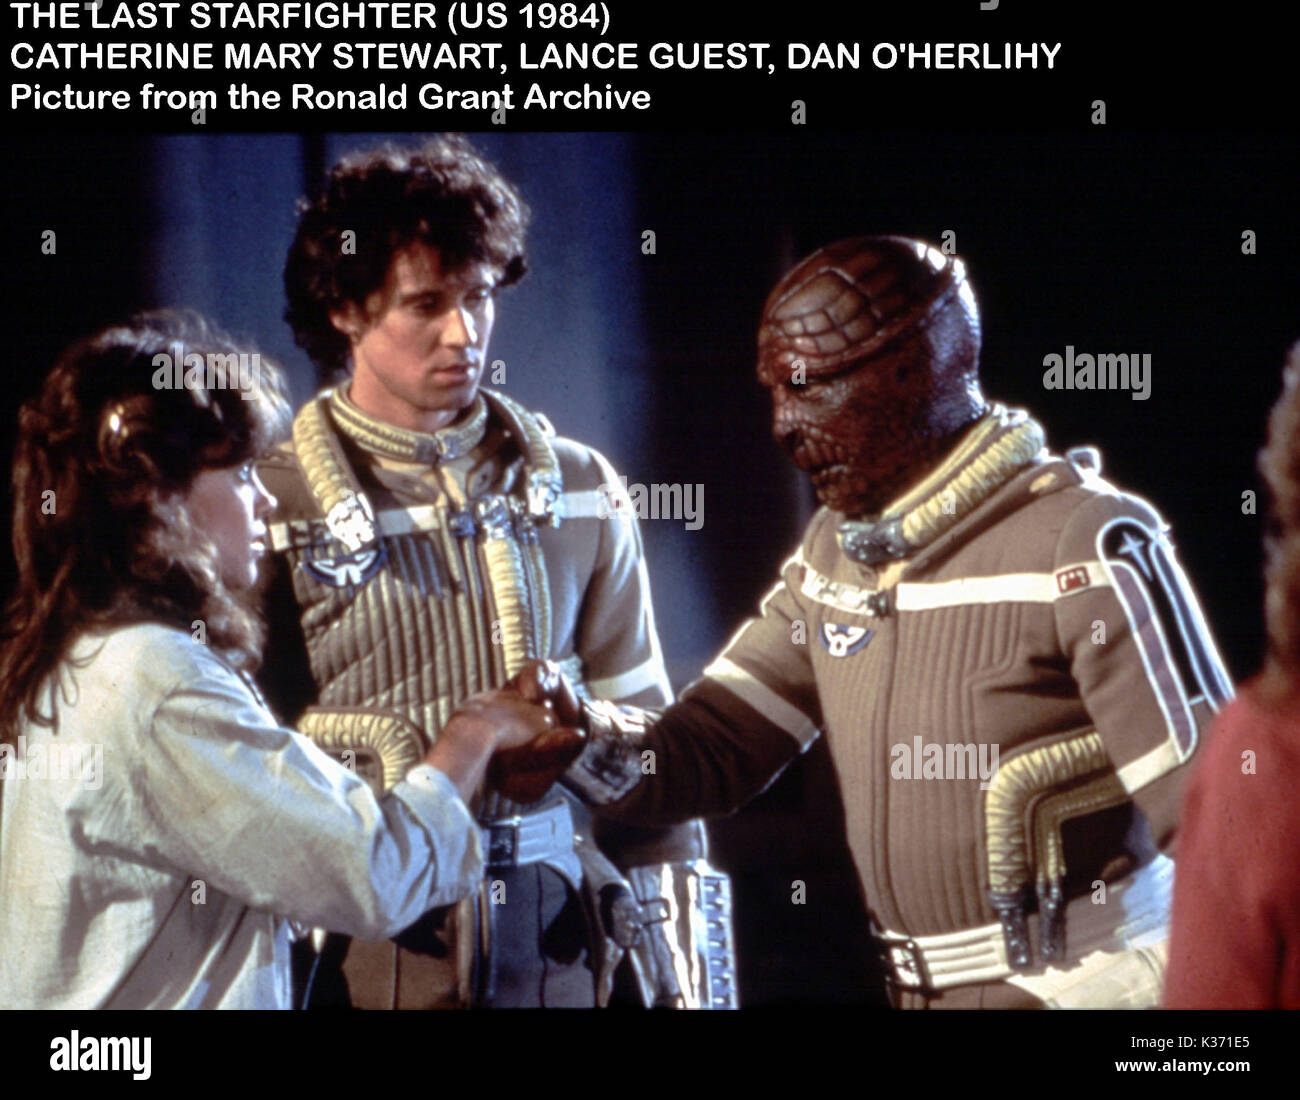 THE LAST STARFIGHTER CATHERINE MARY STEWART, LANCE GUEST, DAN OHERLIHY Date : 1984 Banque D'Images